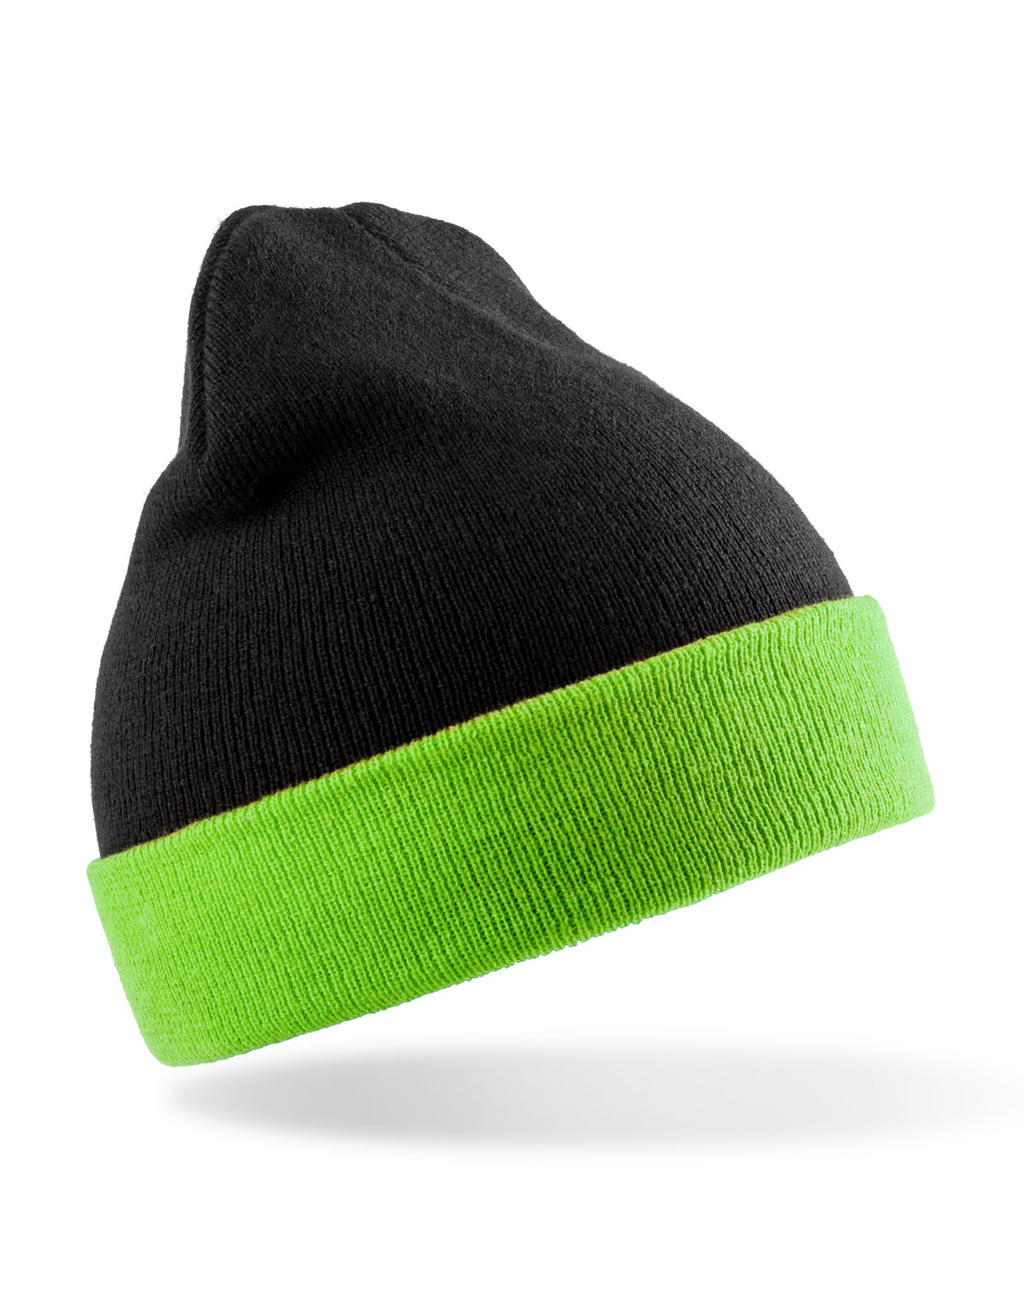  Recycled Black Compass Beanie in Farbe Black/Lime